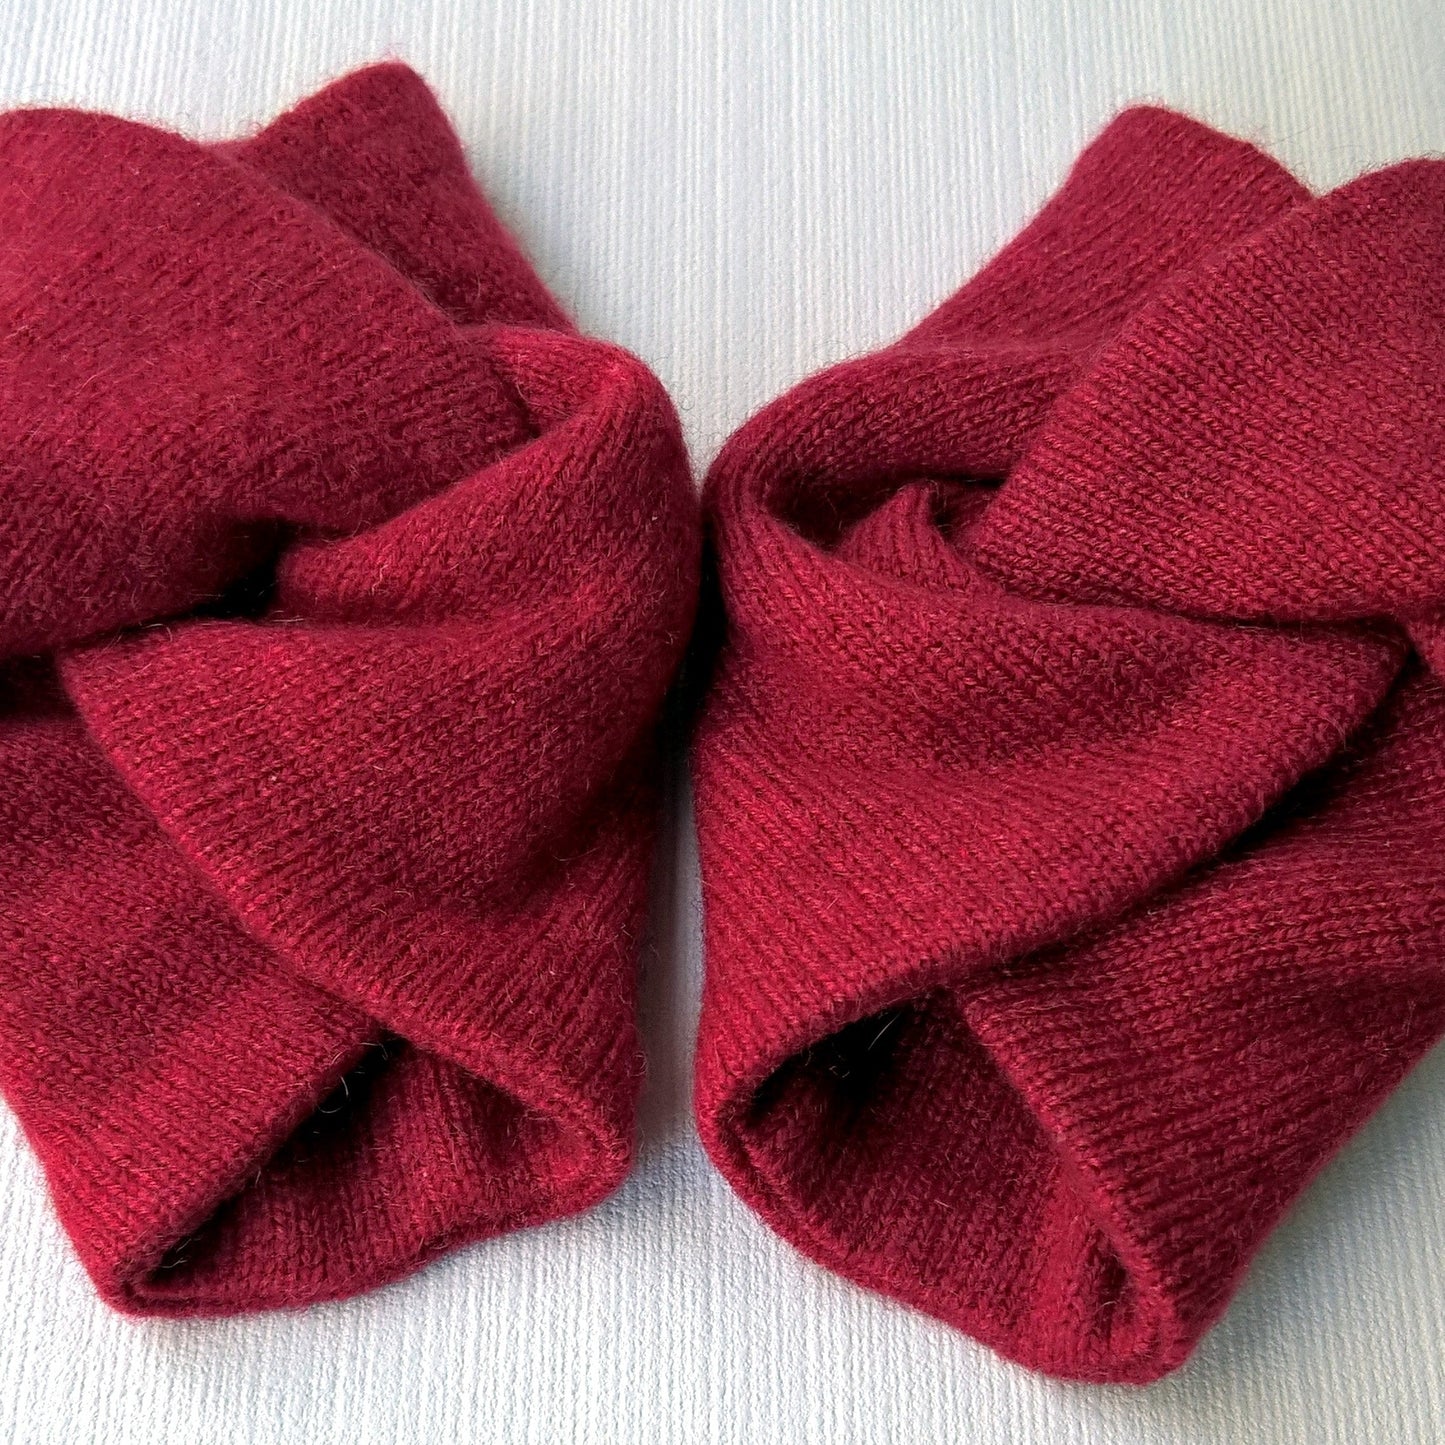 A double layer of cashmere make the wrist warmers extra warm